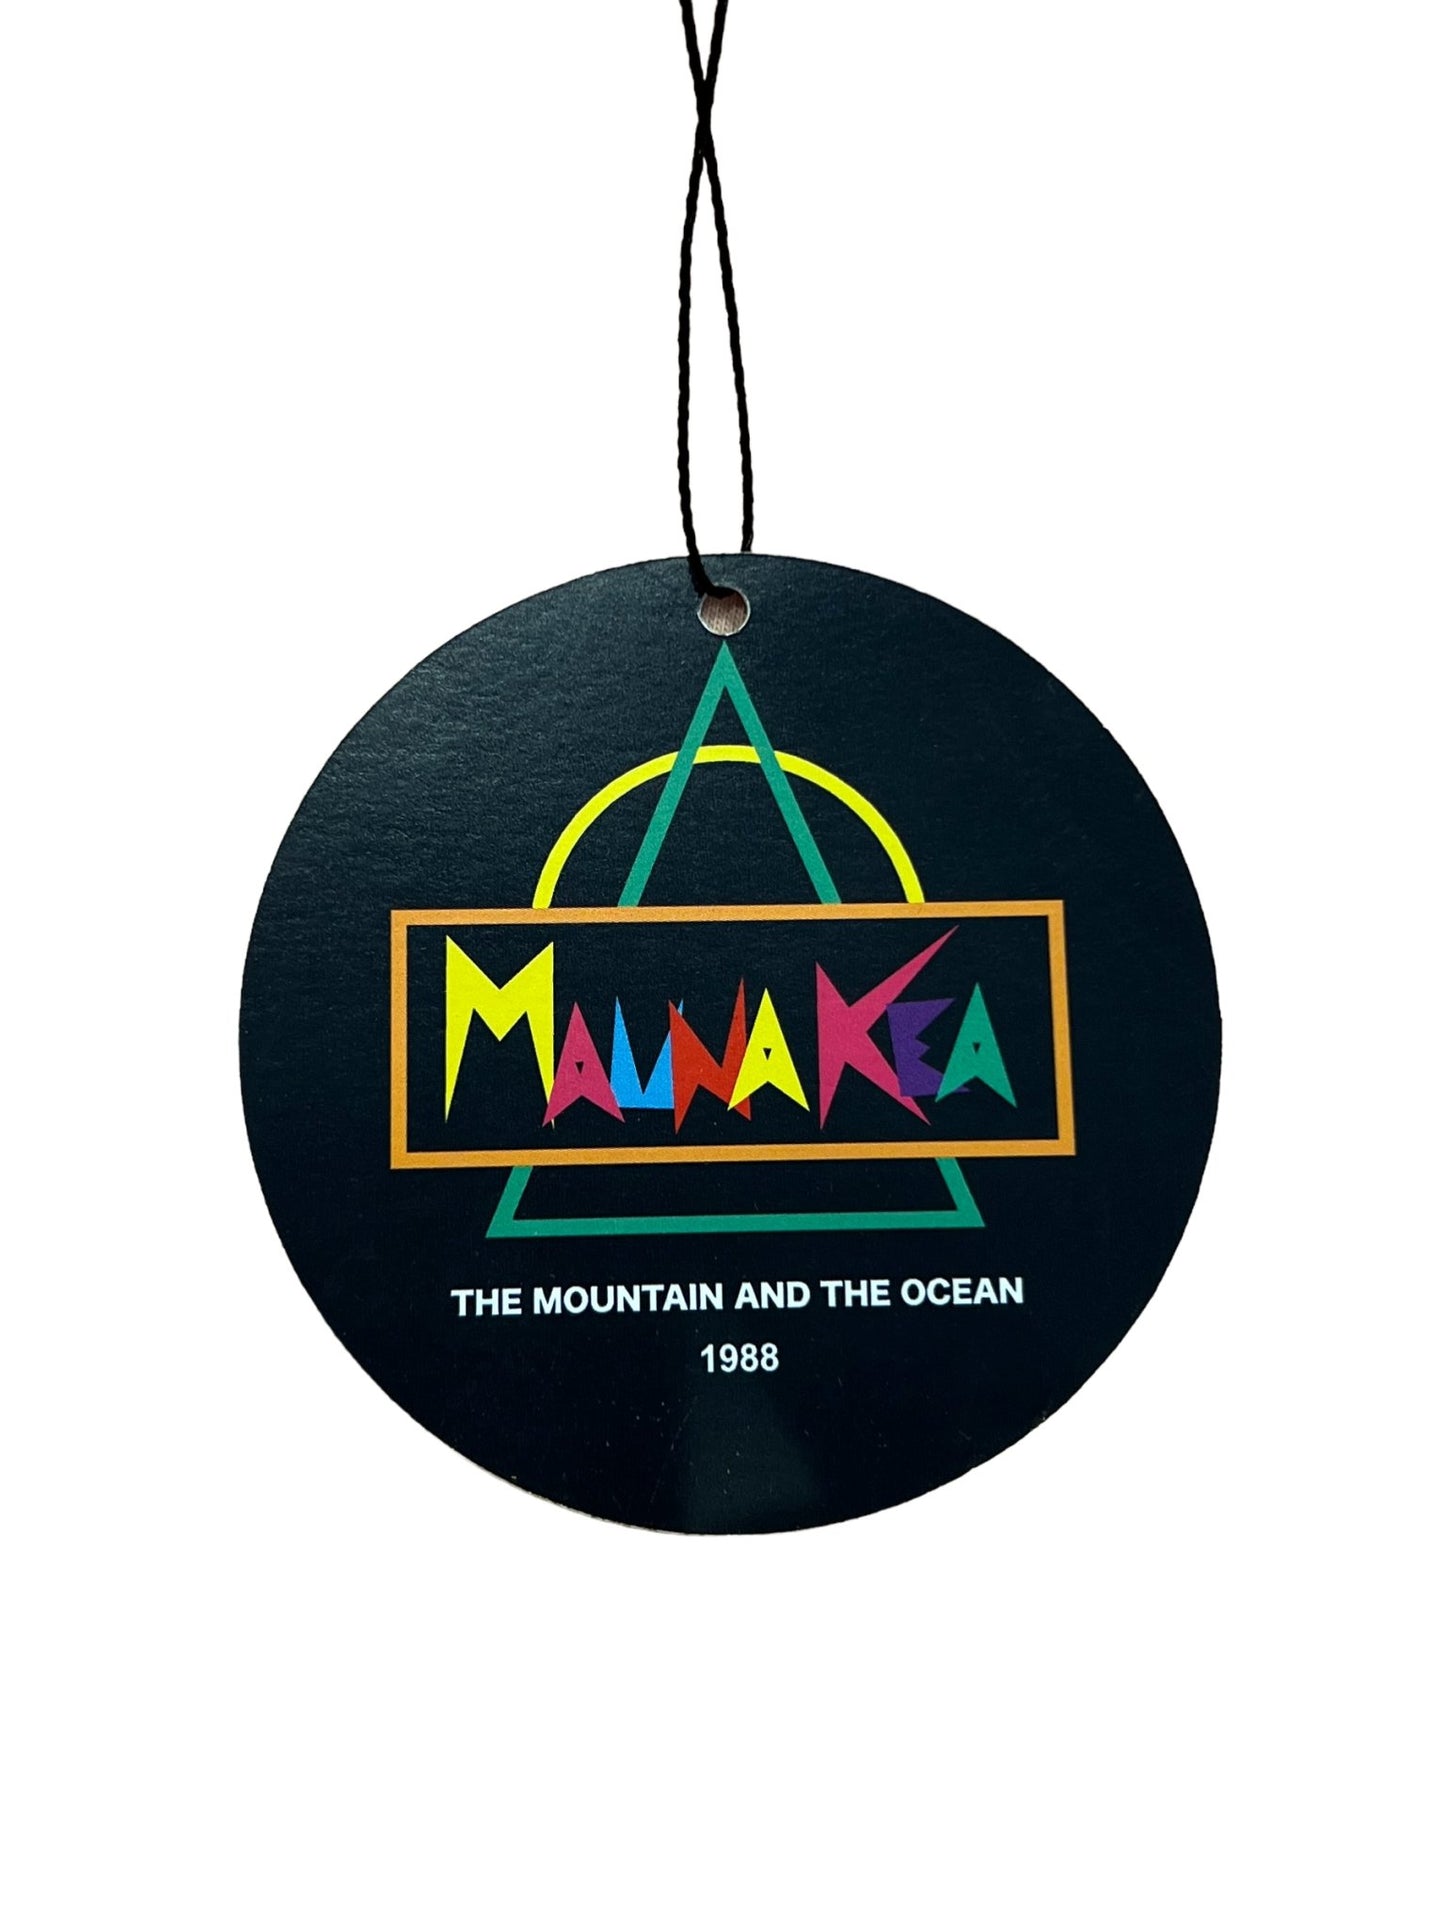 A MAUNA-KEA MKU142-PM2 ALLOVER PRINT SHIRT GRN with colorful text "MAUNA KEA" and "The Mountain and the Ocean 1988" printed on it, hanging by a black string, featuring a Mauna-Kea graphic.